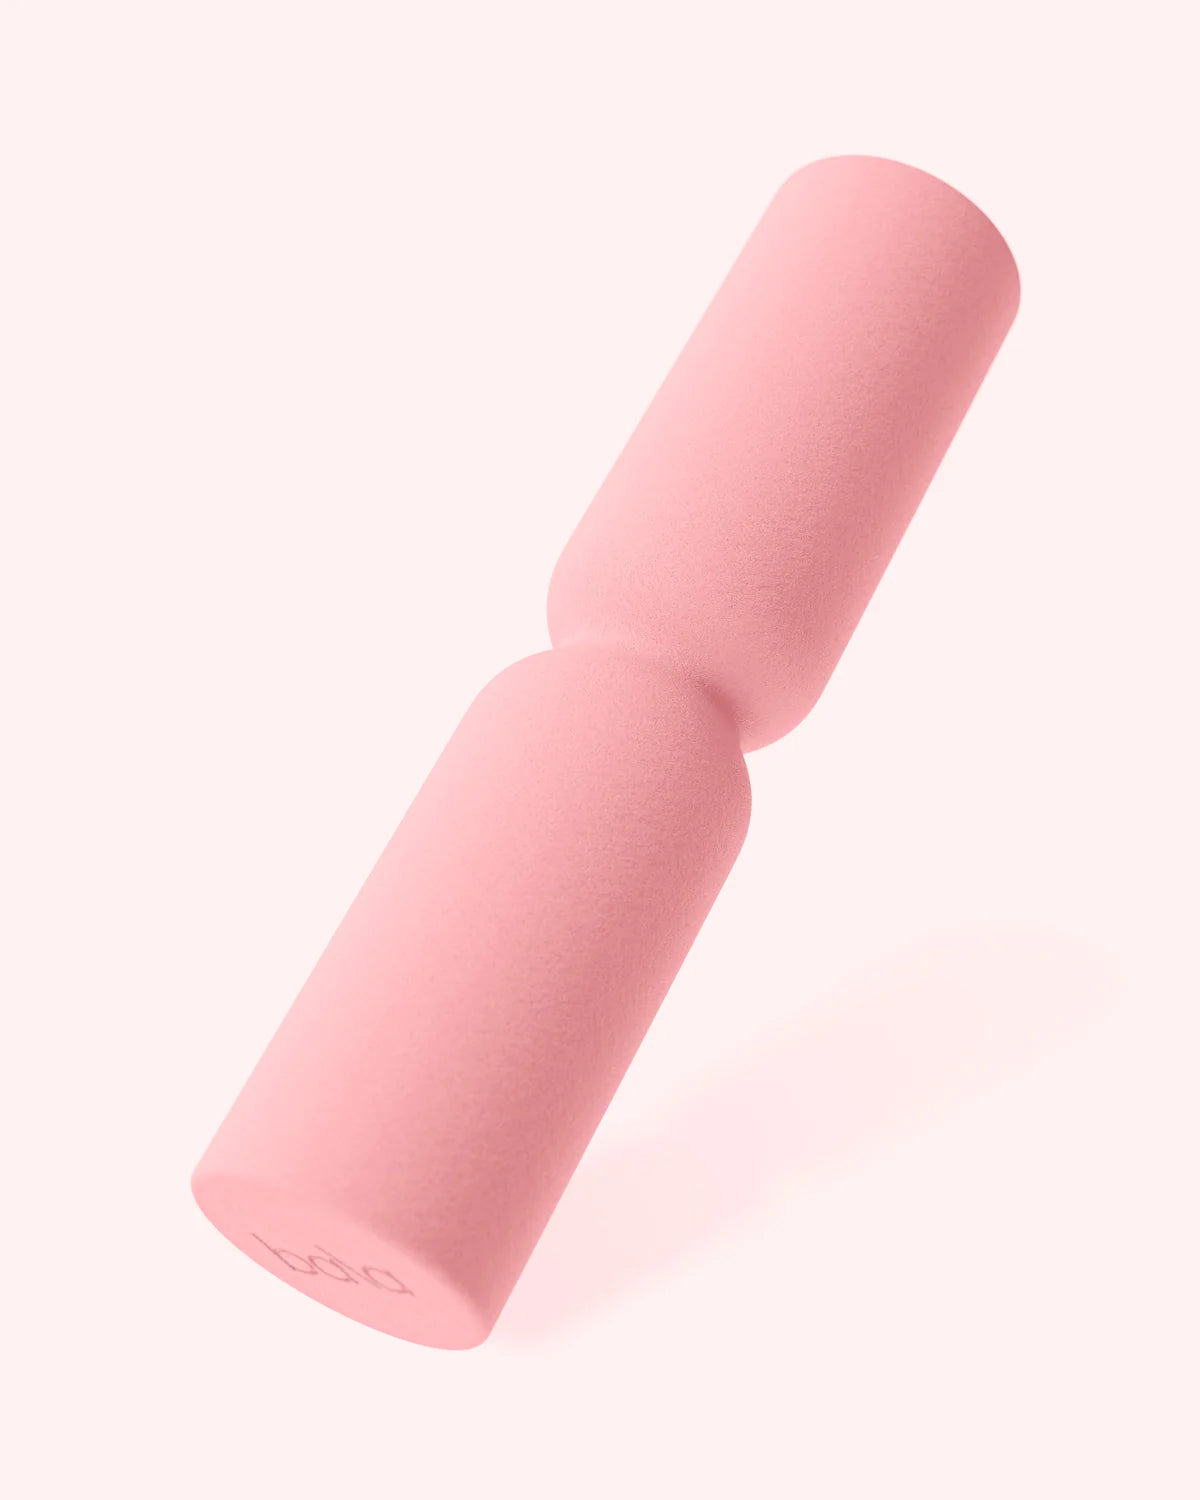 The Hourglass Roller-Blush